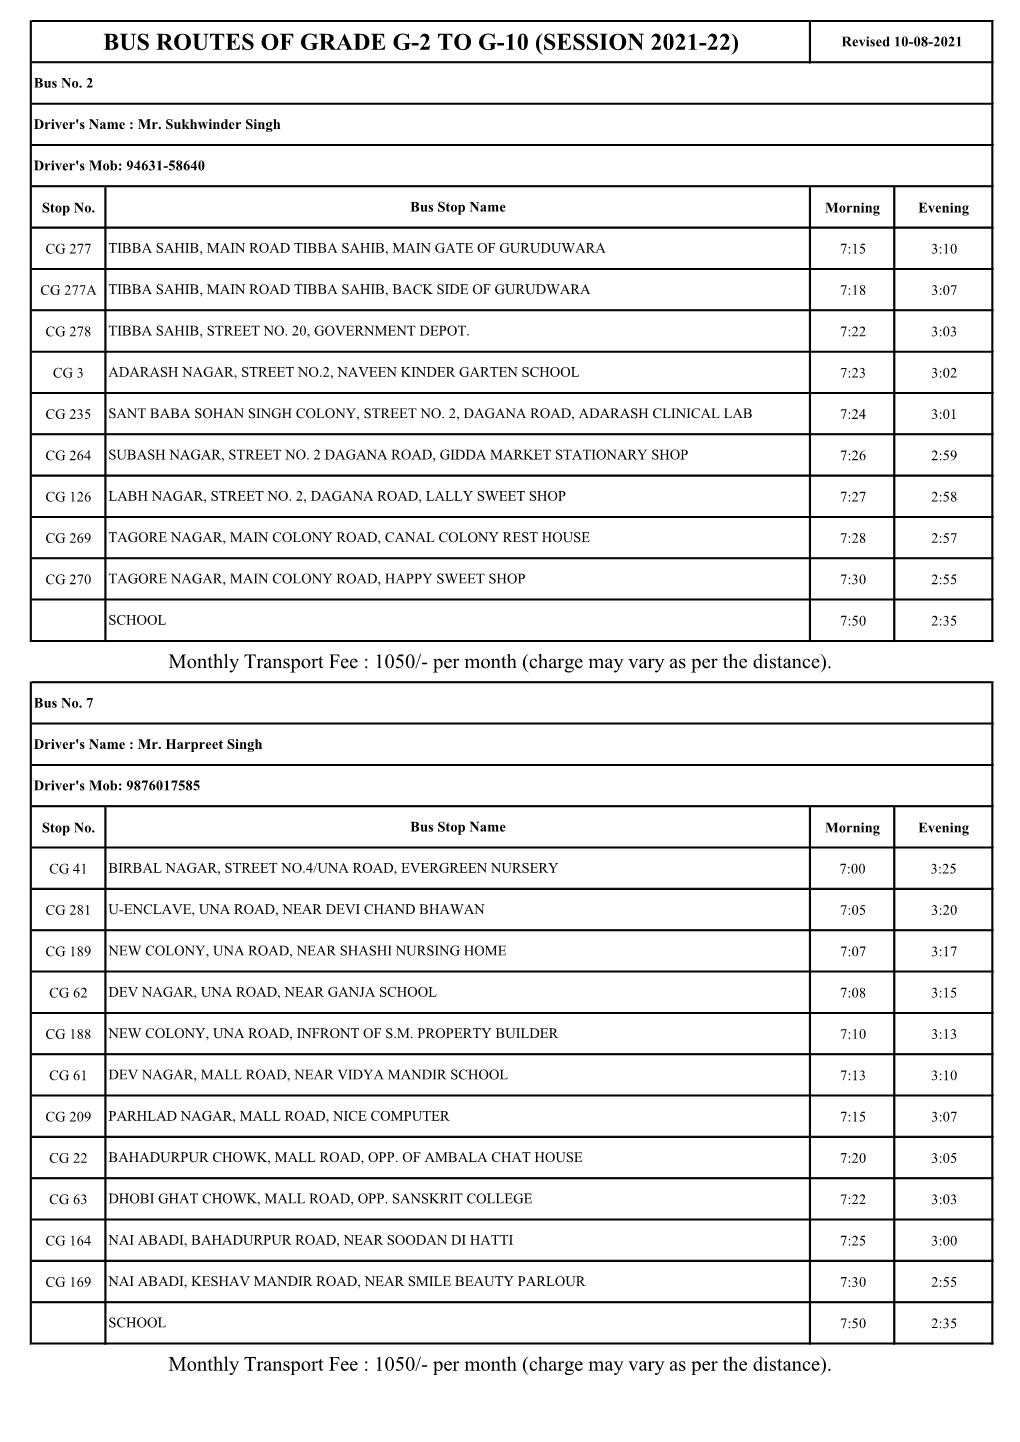 BUS ROUTES of GRADE G-2 to G-10 (SESSION 2021-22) Revised 10-08-2021